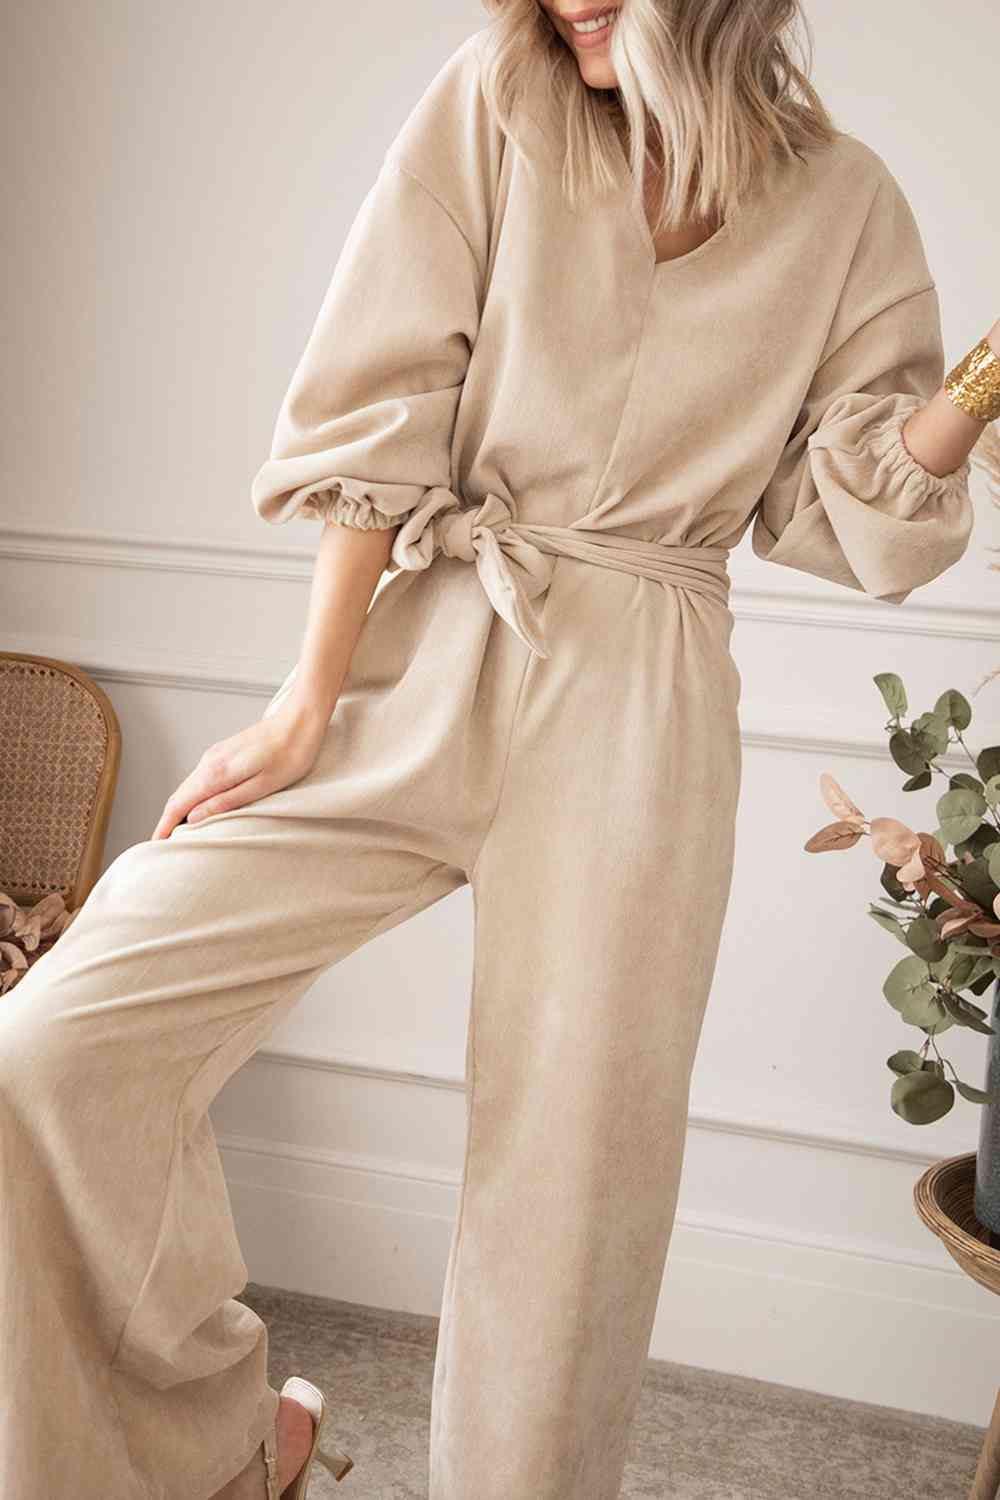 Trendsi Trends Tie Waist Jumpsuit V-Neck Wide Leg. The Trendsi Trends Tie Waist Jumpsuit boasts a flattering V-neckline and wide-leg design, creating a stylish and comfortable outfit option. Its waist tie detail adds an extra touch of fashion-forward sophistication.